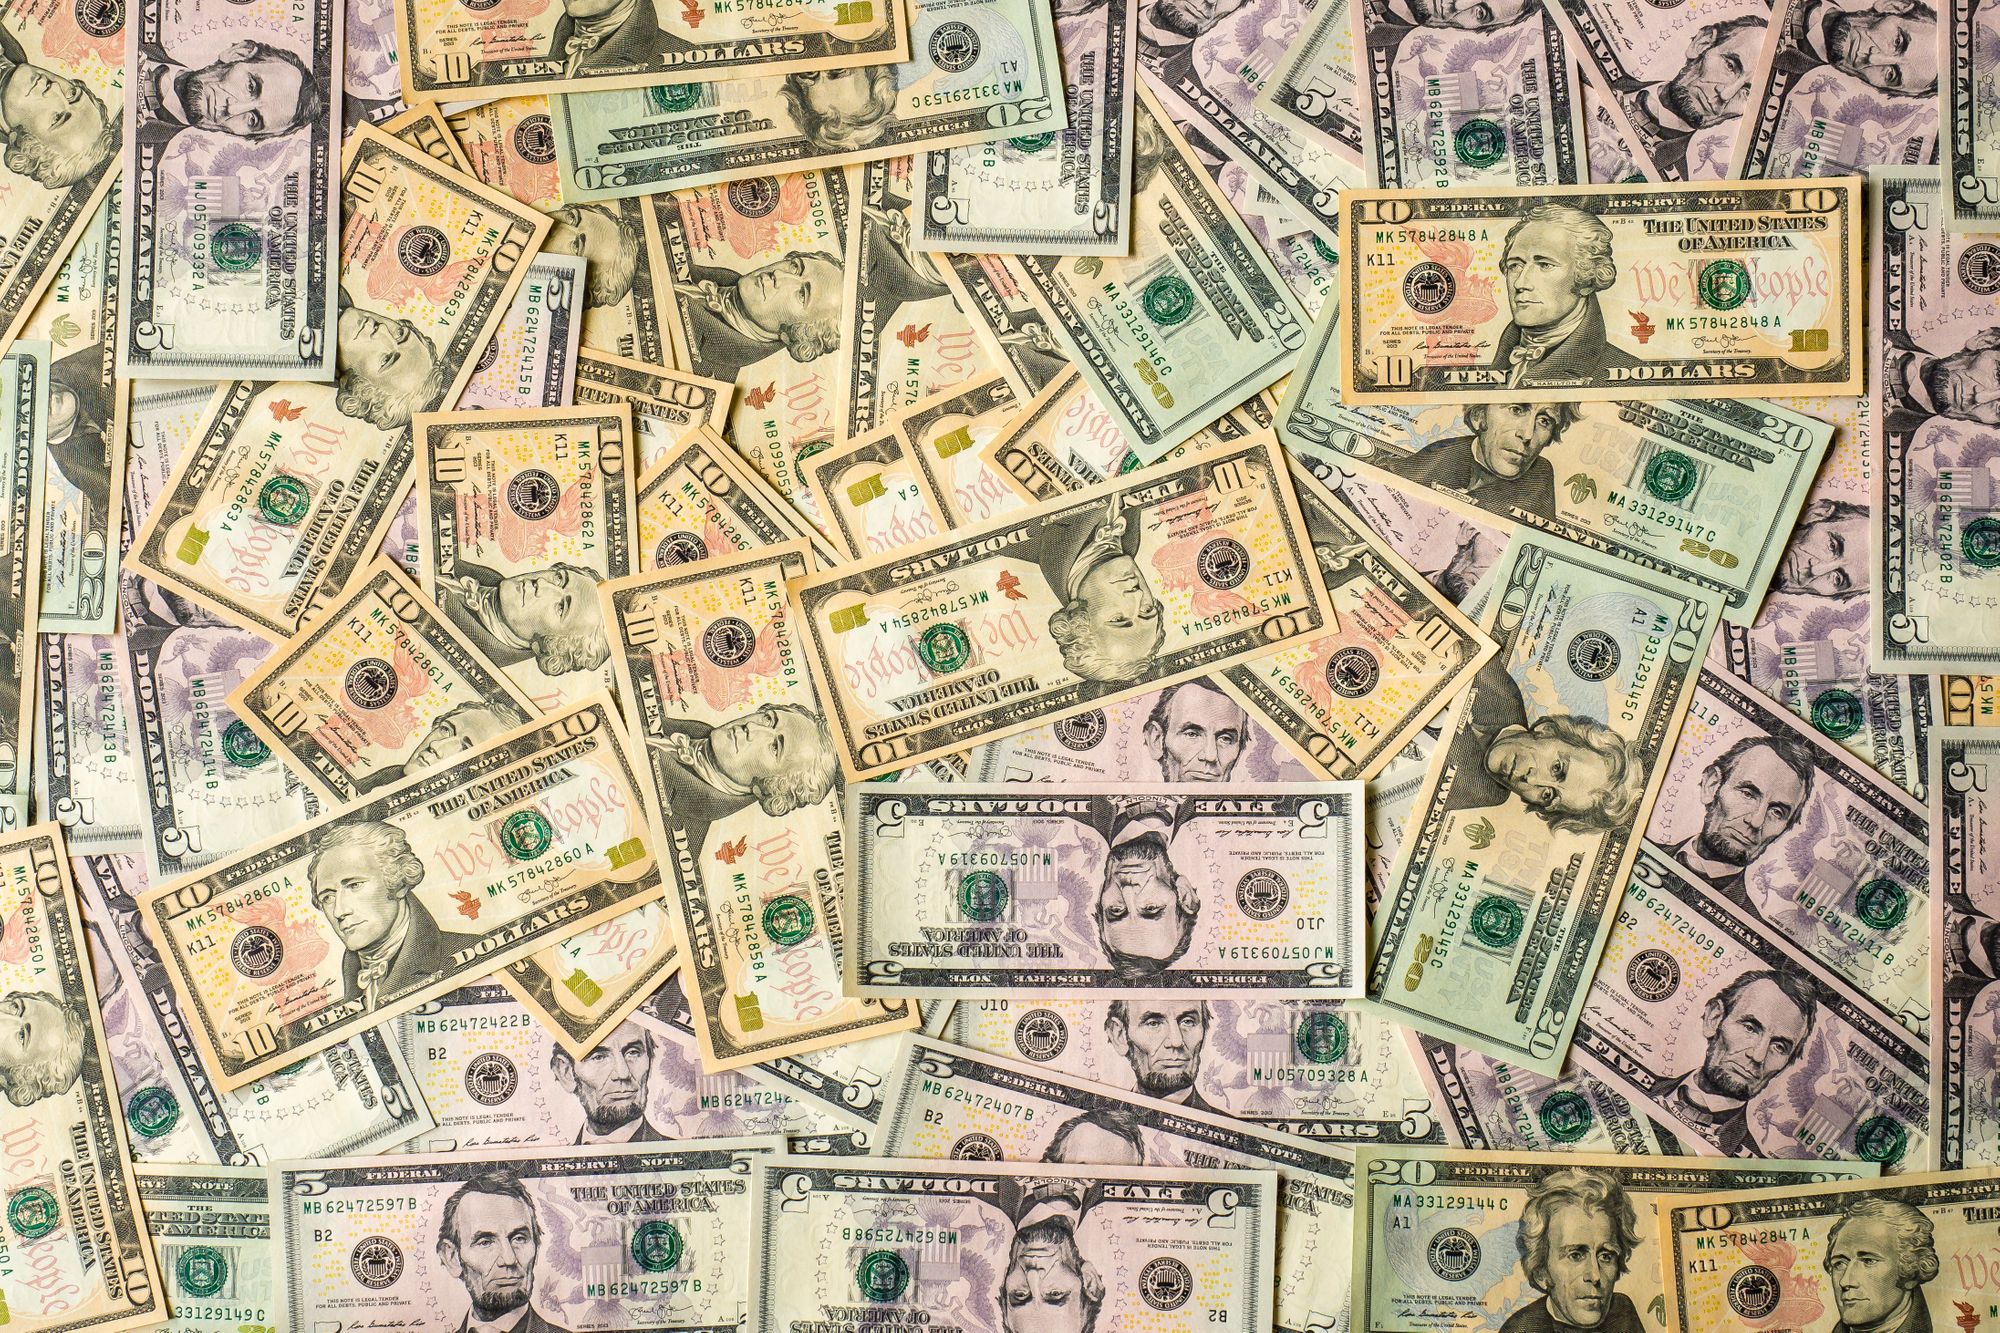 Podcast Money Dispatch: The Full-Stack, Full-Time Podcaster Who Made Over $100k in 2019